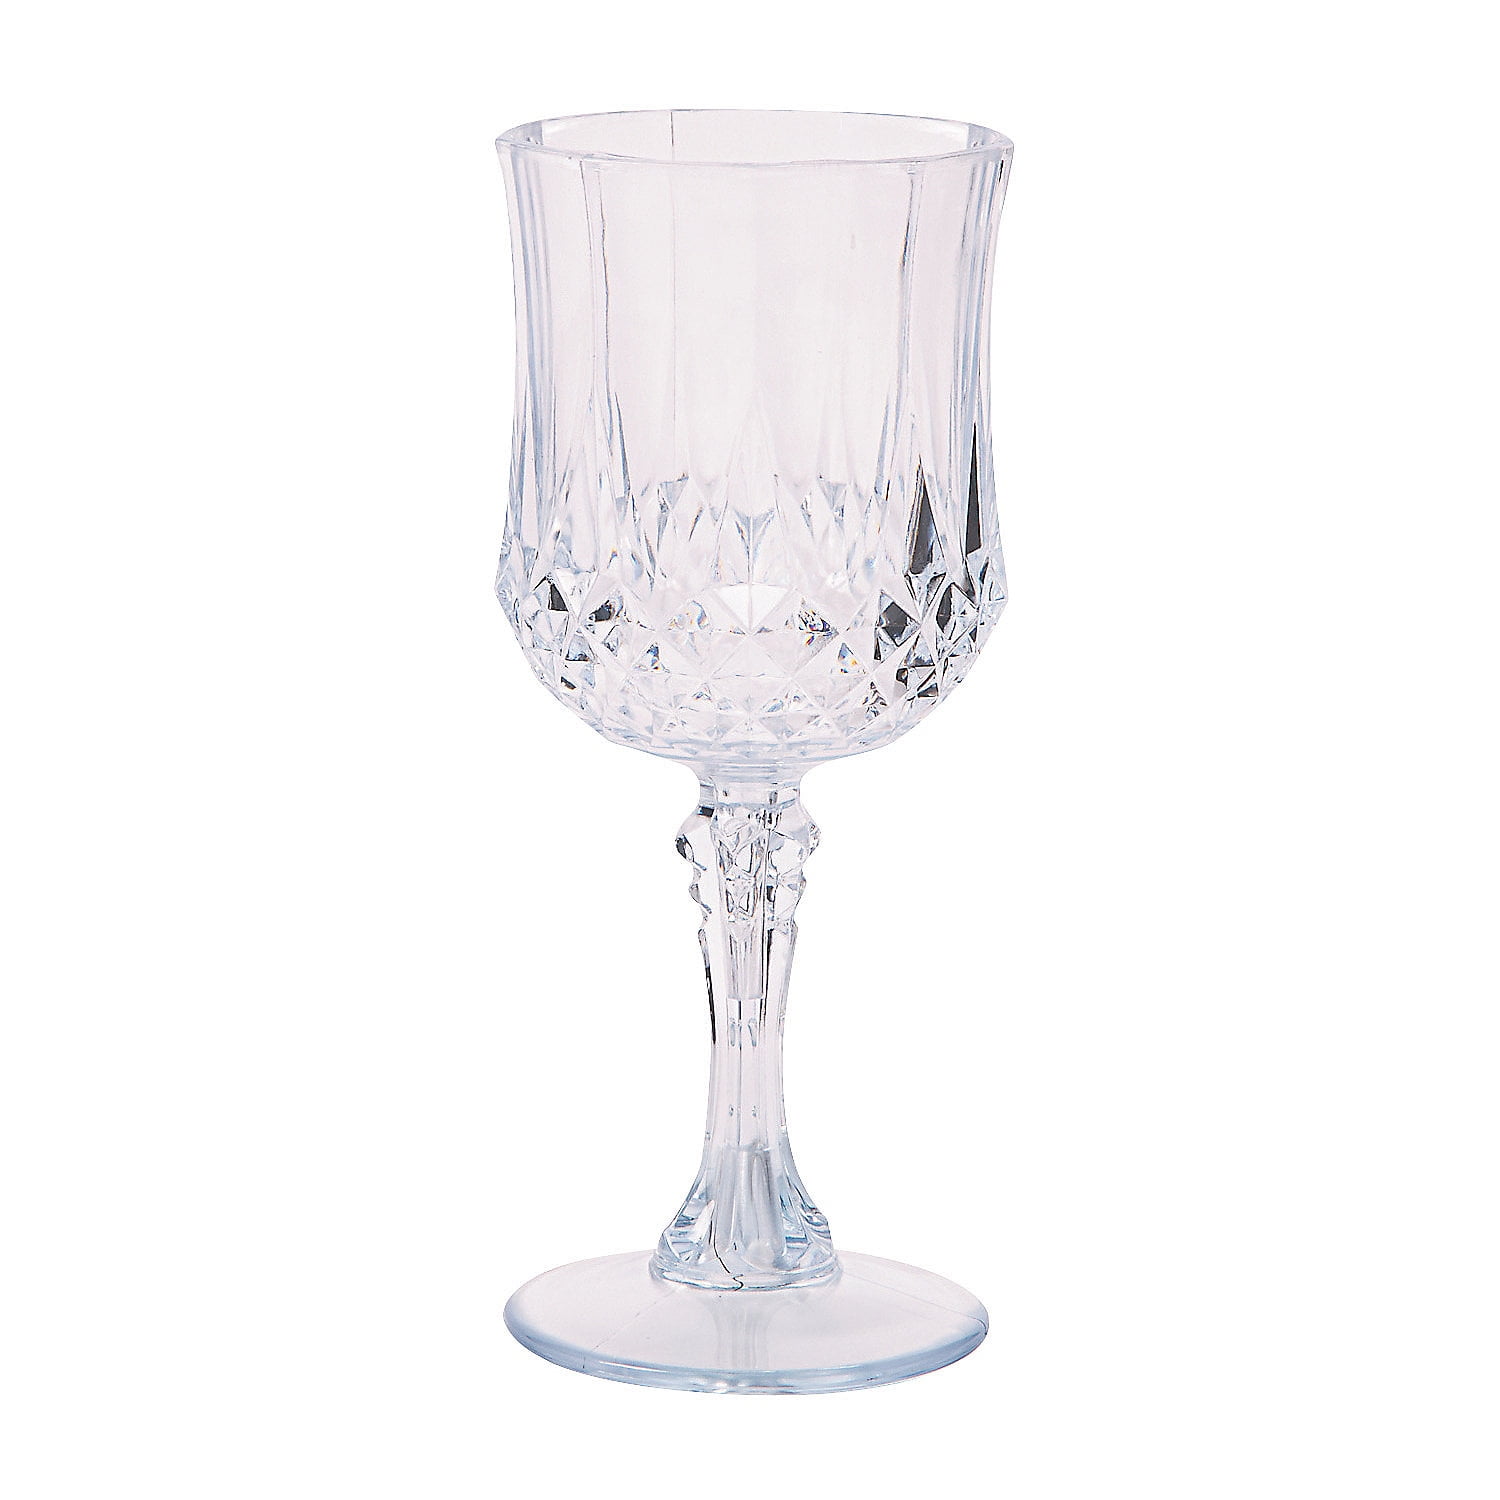 4000ml Super Big Wine Glass Extra-huge Brandy Glass Large Capacity Crystal  Glass for Bar Party Wedding Family Dinner (4000ml/135.2oz)